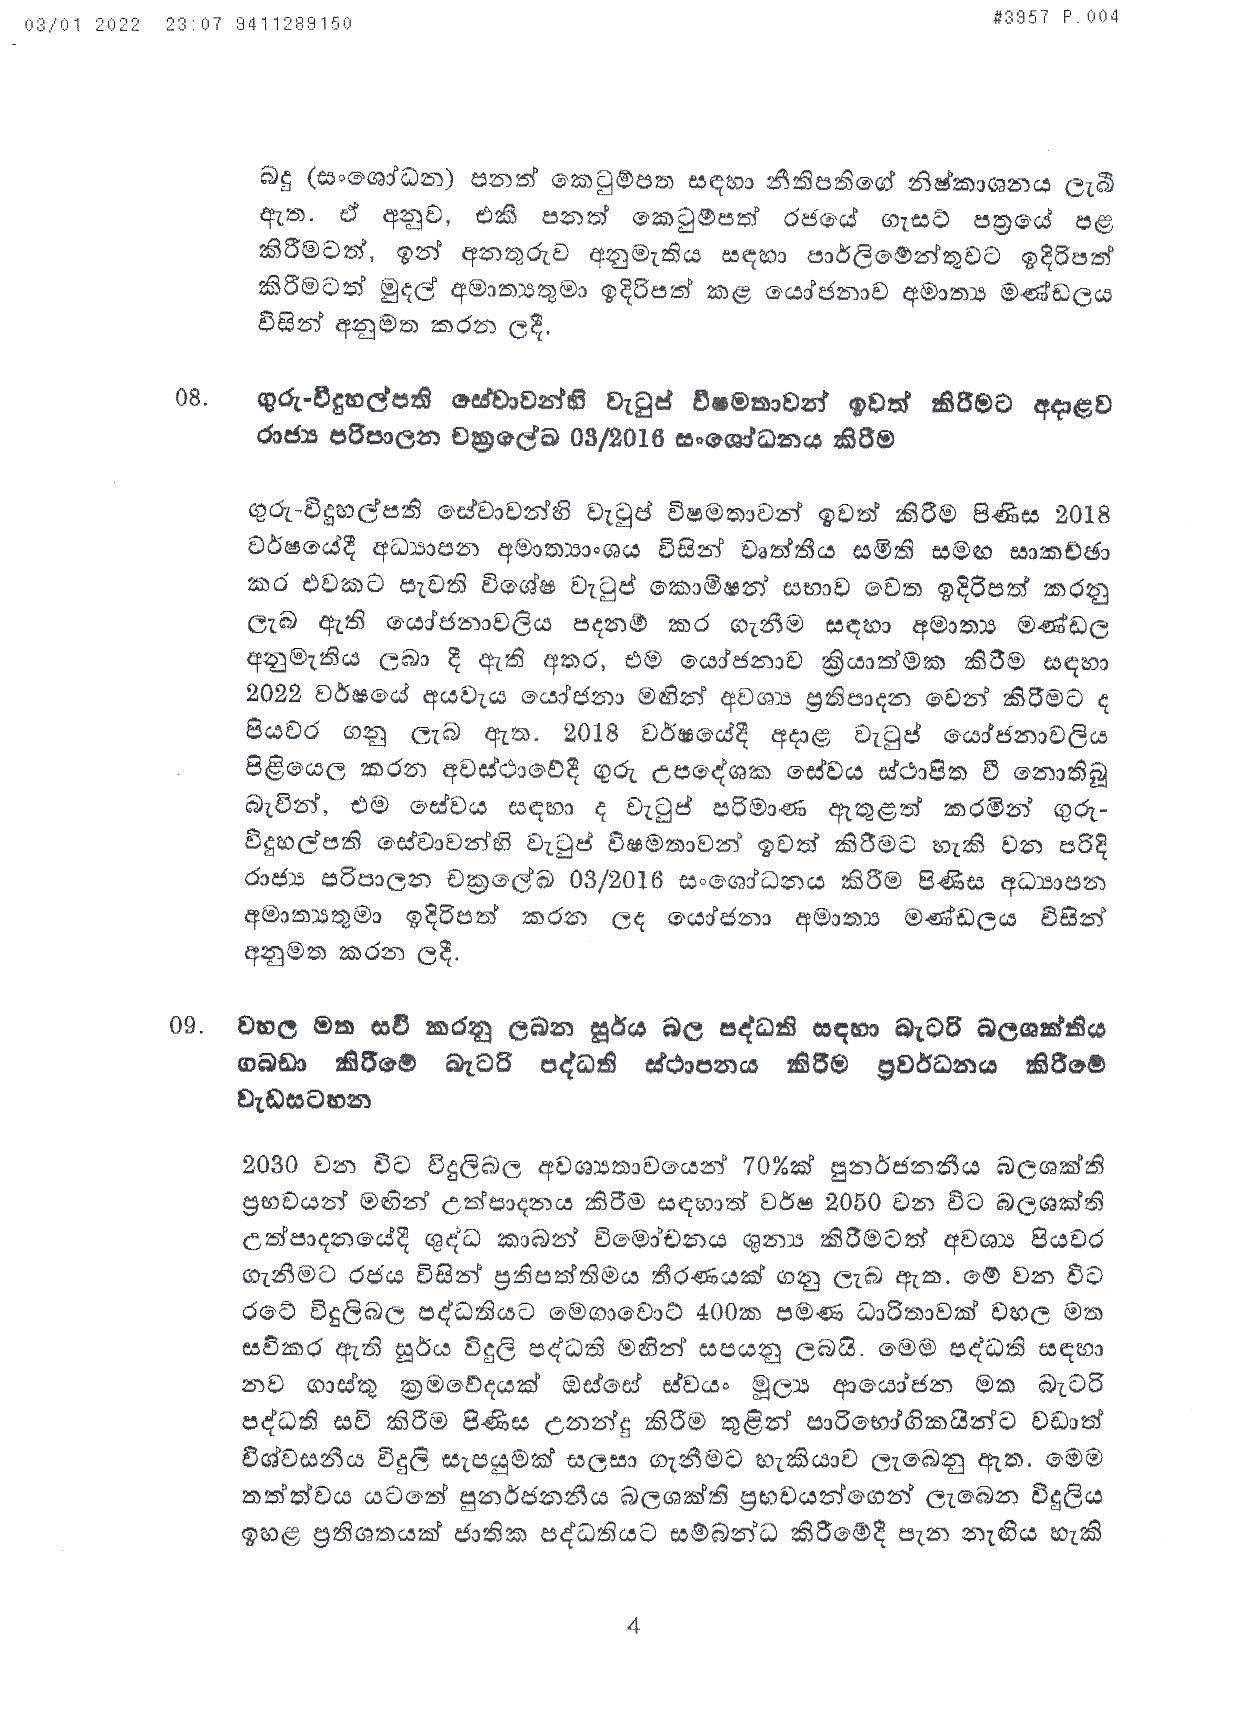 Cabinet Decision on 03.01.2022 page 004